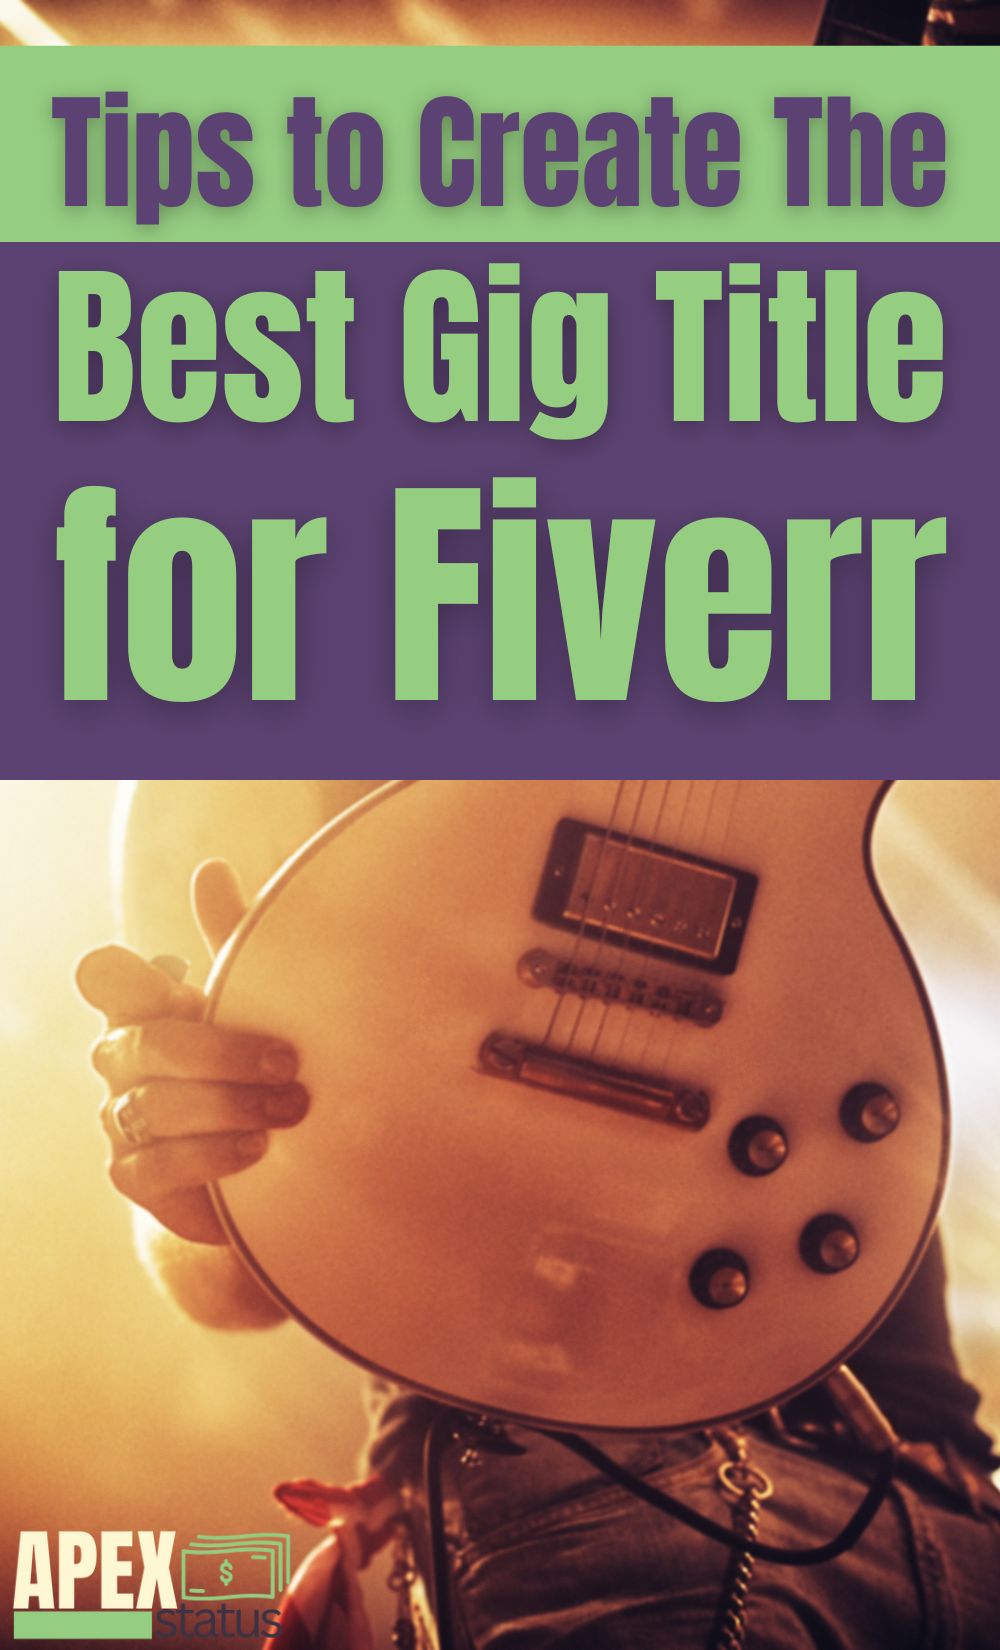 Tips to Create The Best Gig Title for Fiverr